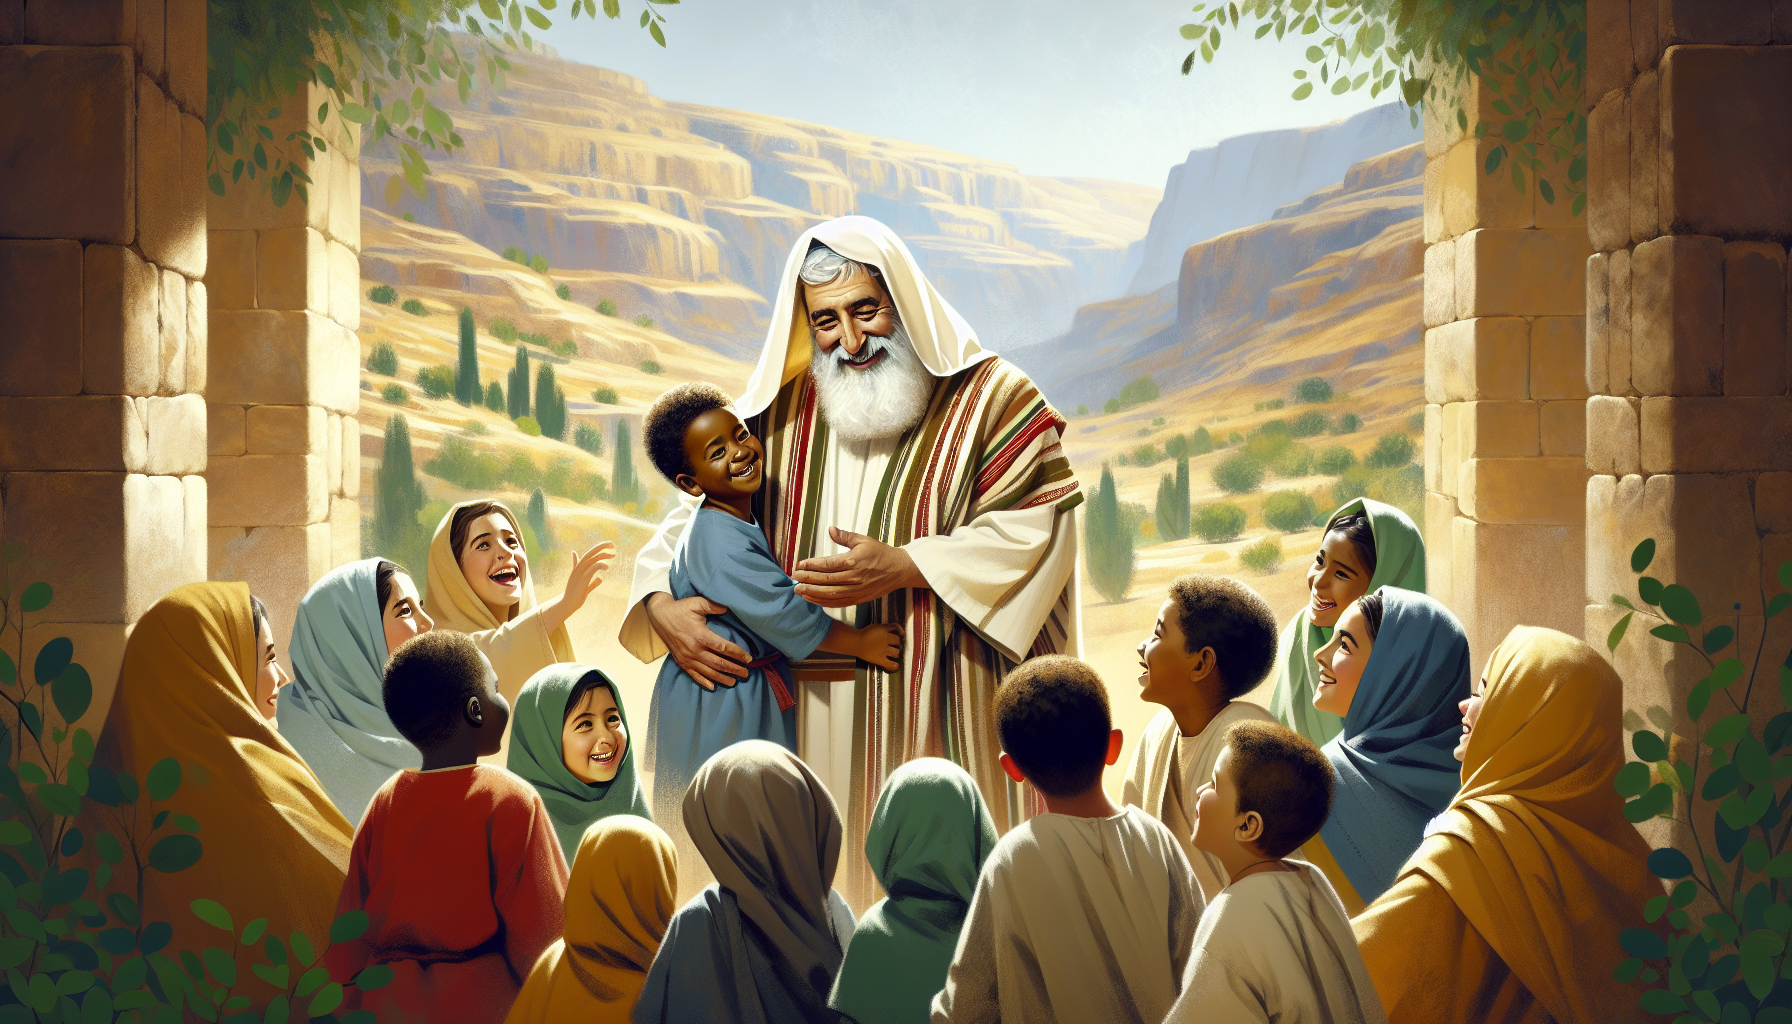 Create a heartwarming scene depicting Jesus surrounded by young children, set in an ancient Judean landscape. The children, of diverse backgrounds, gather around Him with joyful expressions. Jesus, wi